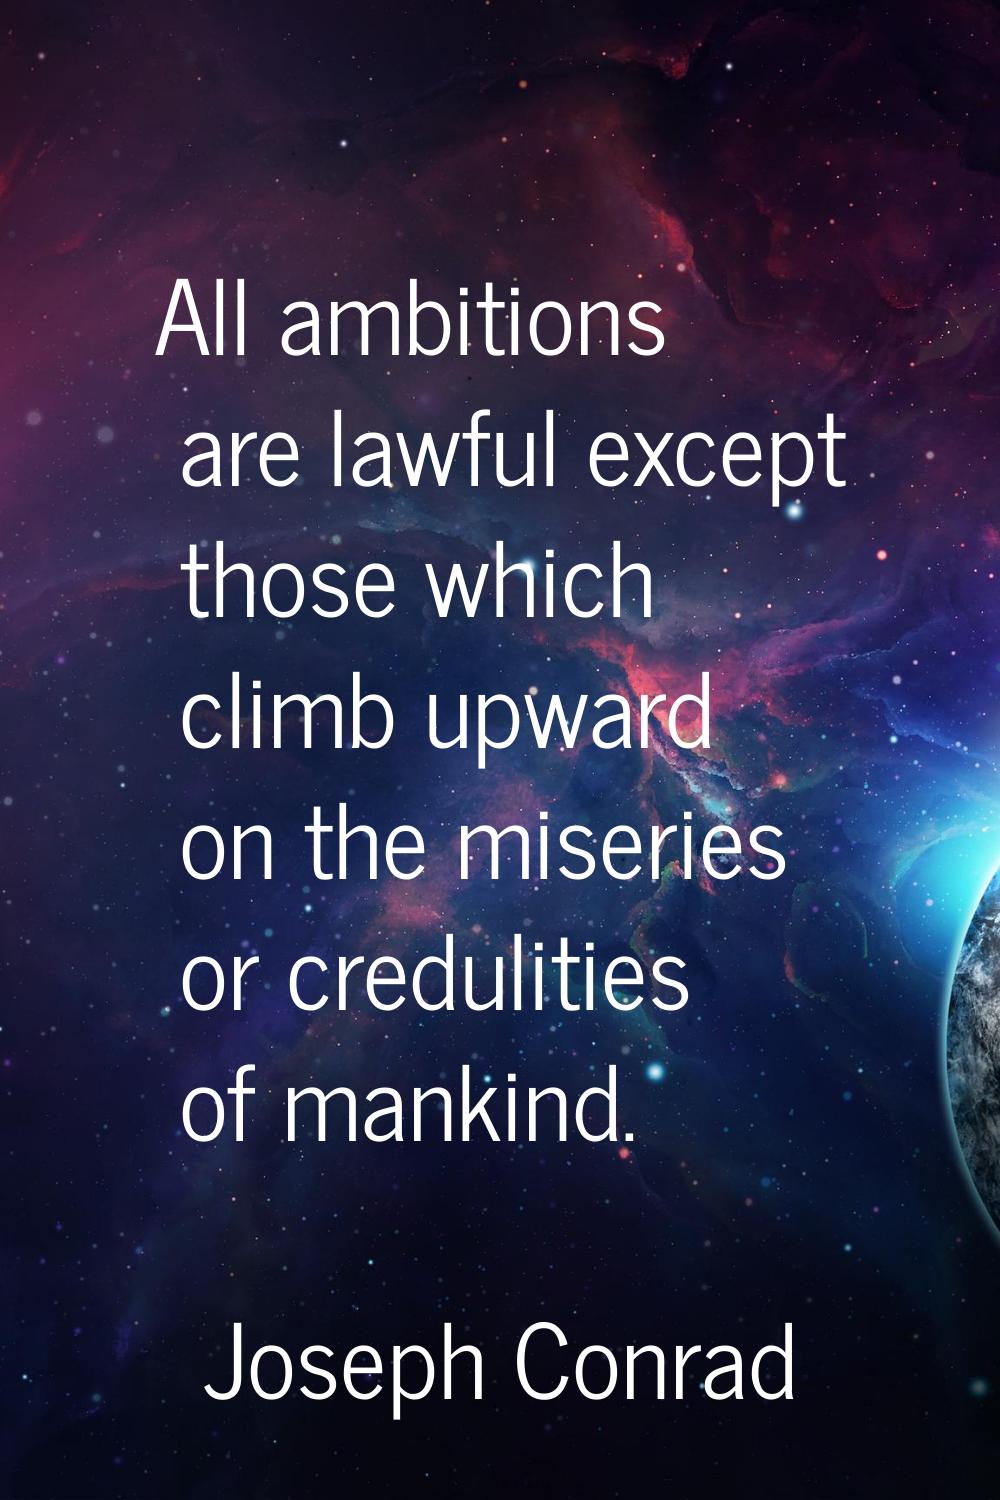 All ambitions are lawful except those which climb upward on the miseries or credulities of mankind.